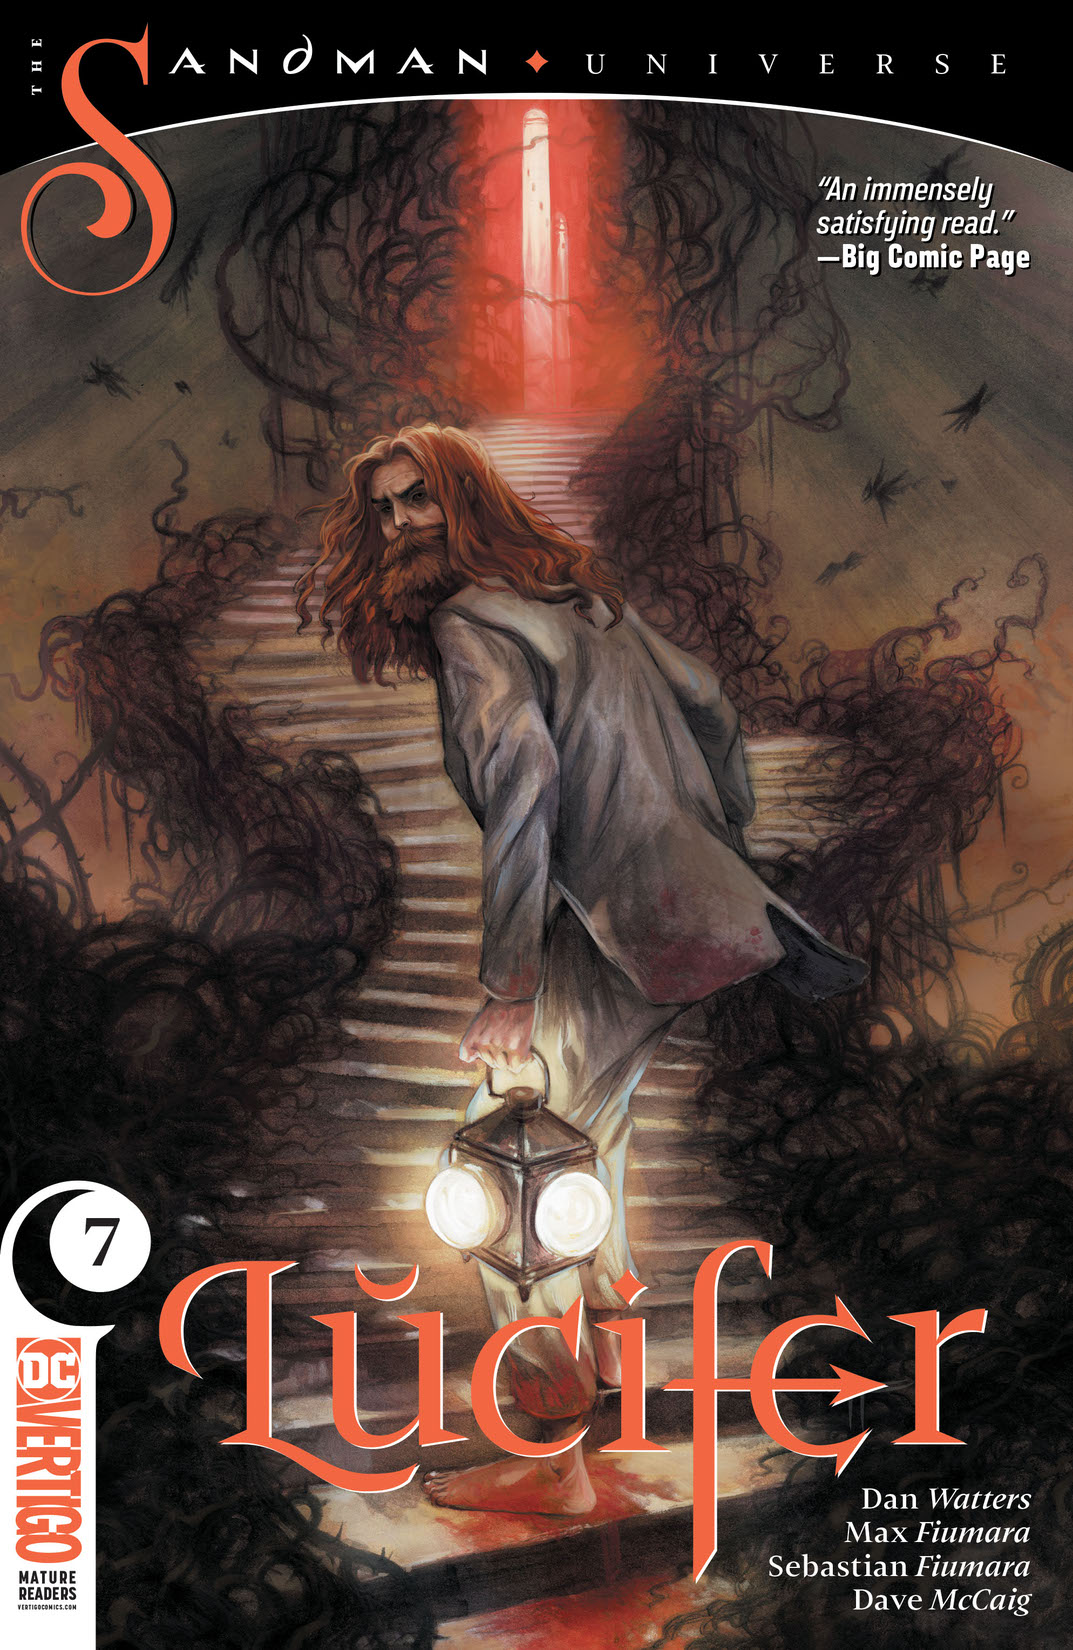 Lucifer #7 preview images